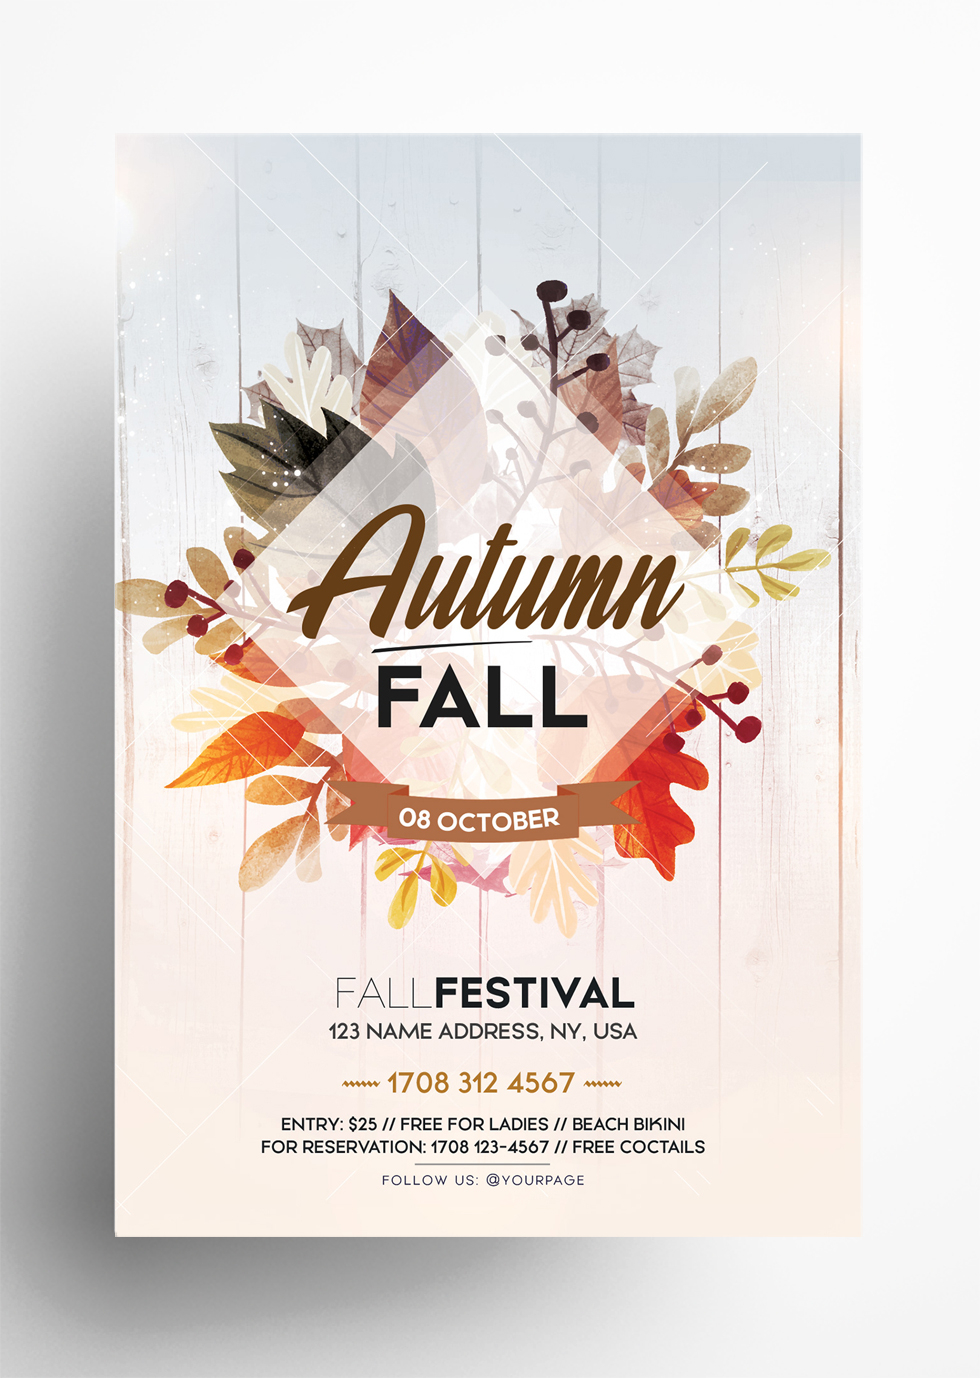 Fall Festival - Autumn Free PSD Flyer Template - PixelsDesign Within Fall Event Flyer Template With Regard To Fall Event Flyer Template